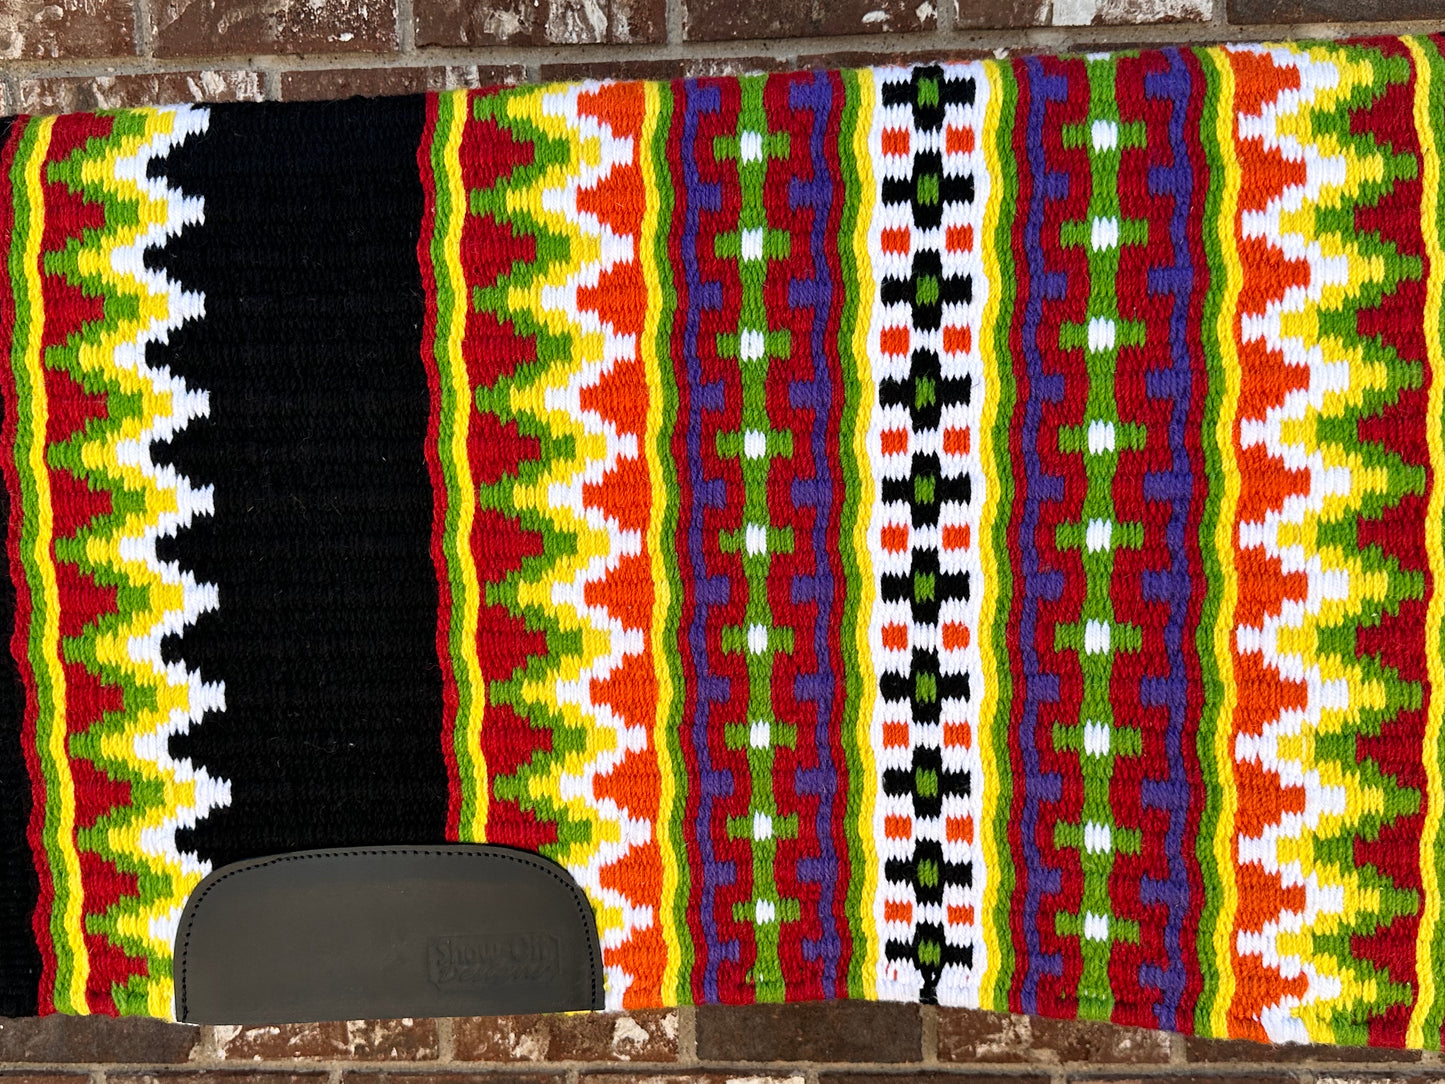 72. Oversized saddle blanket black red yellow lime green purple and white